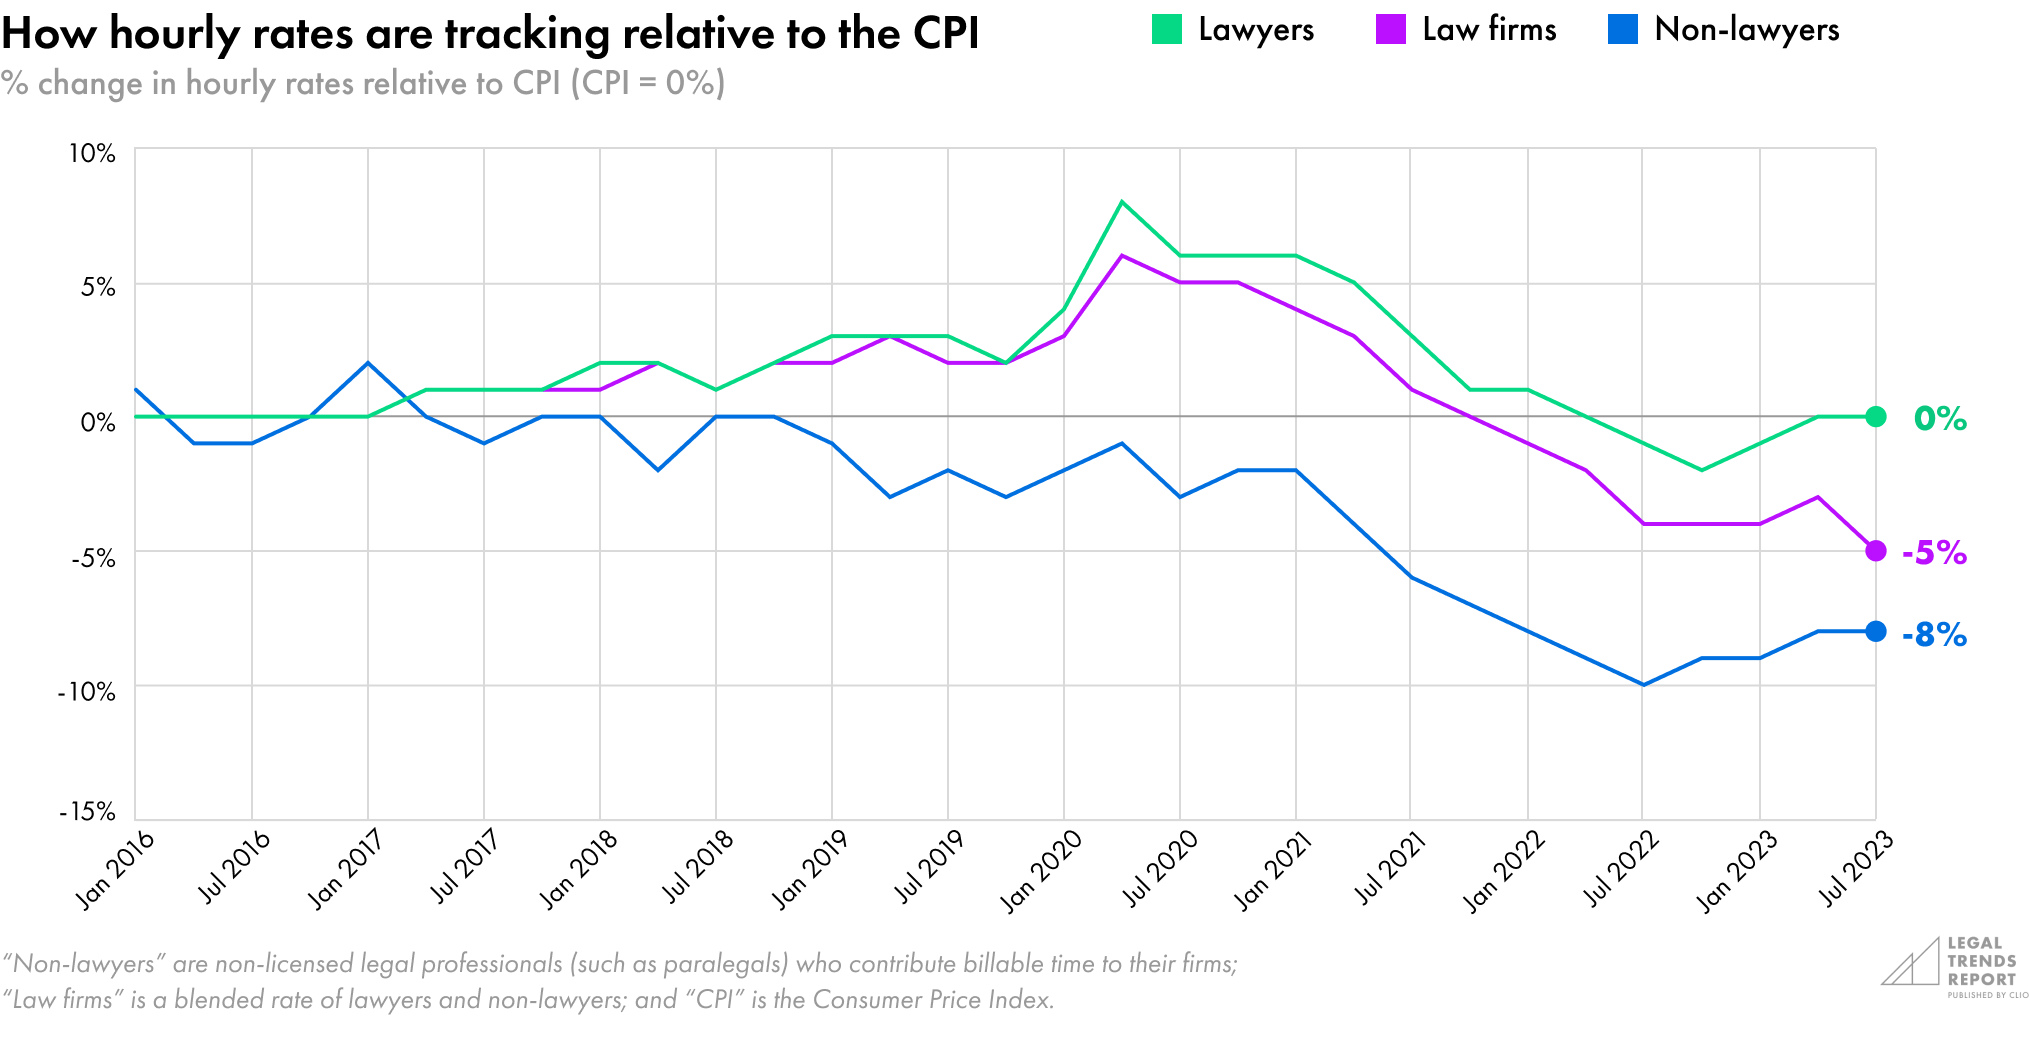 How hourly rates are tracking relative to CPI